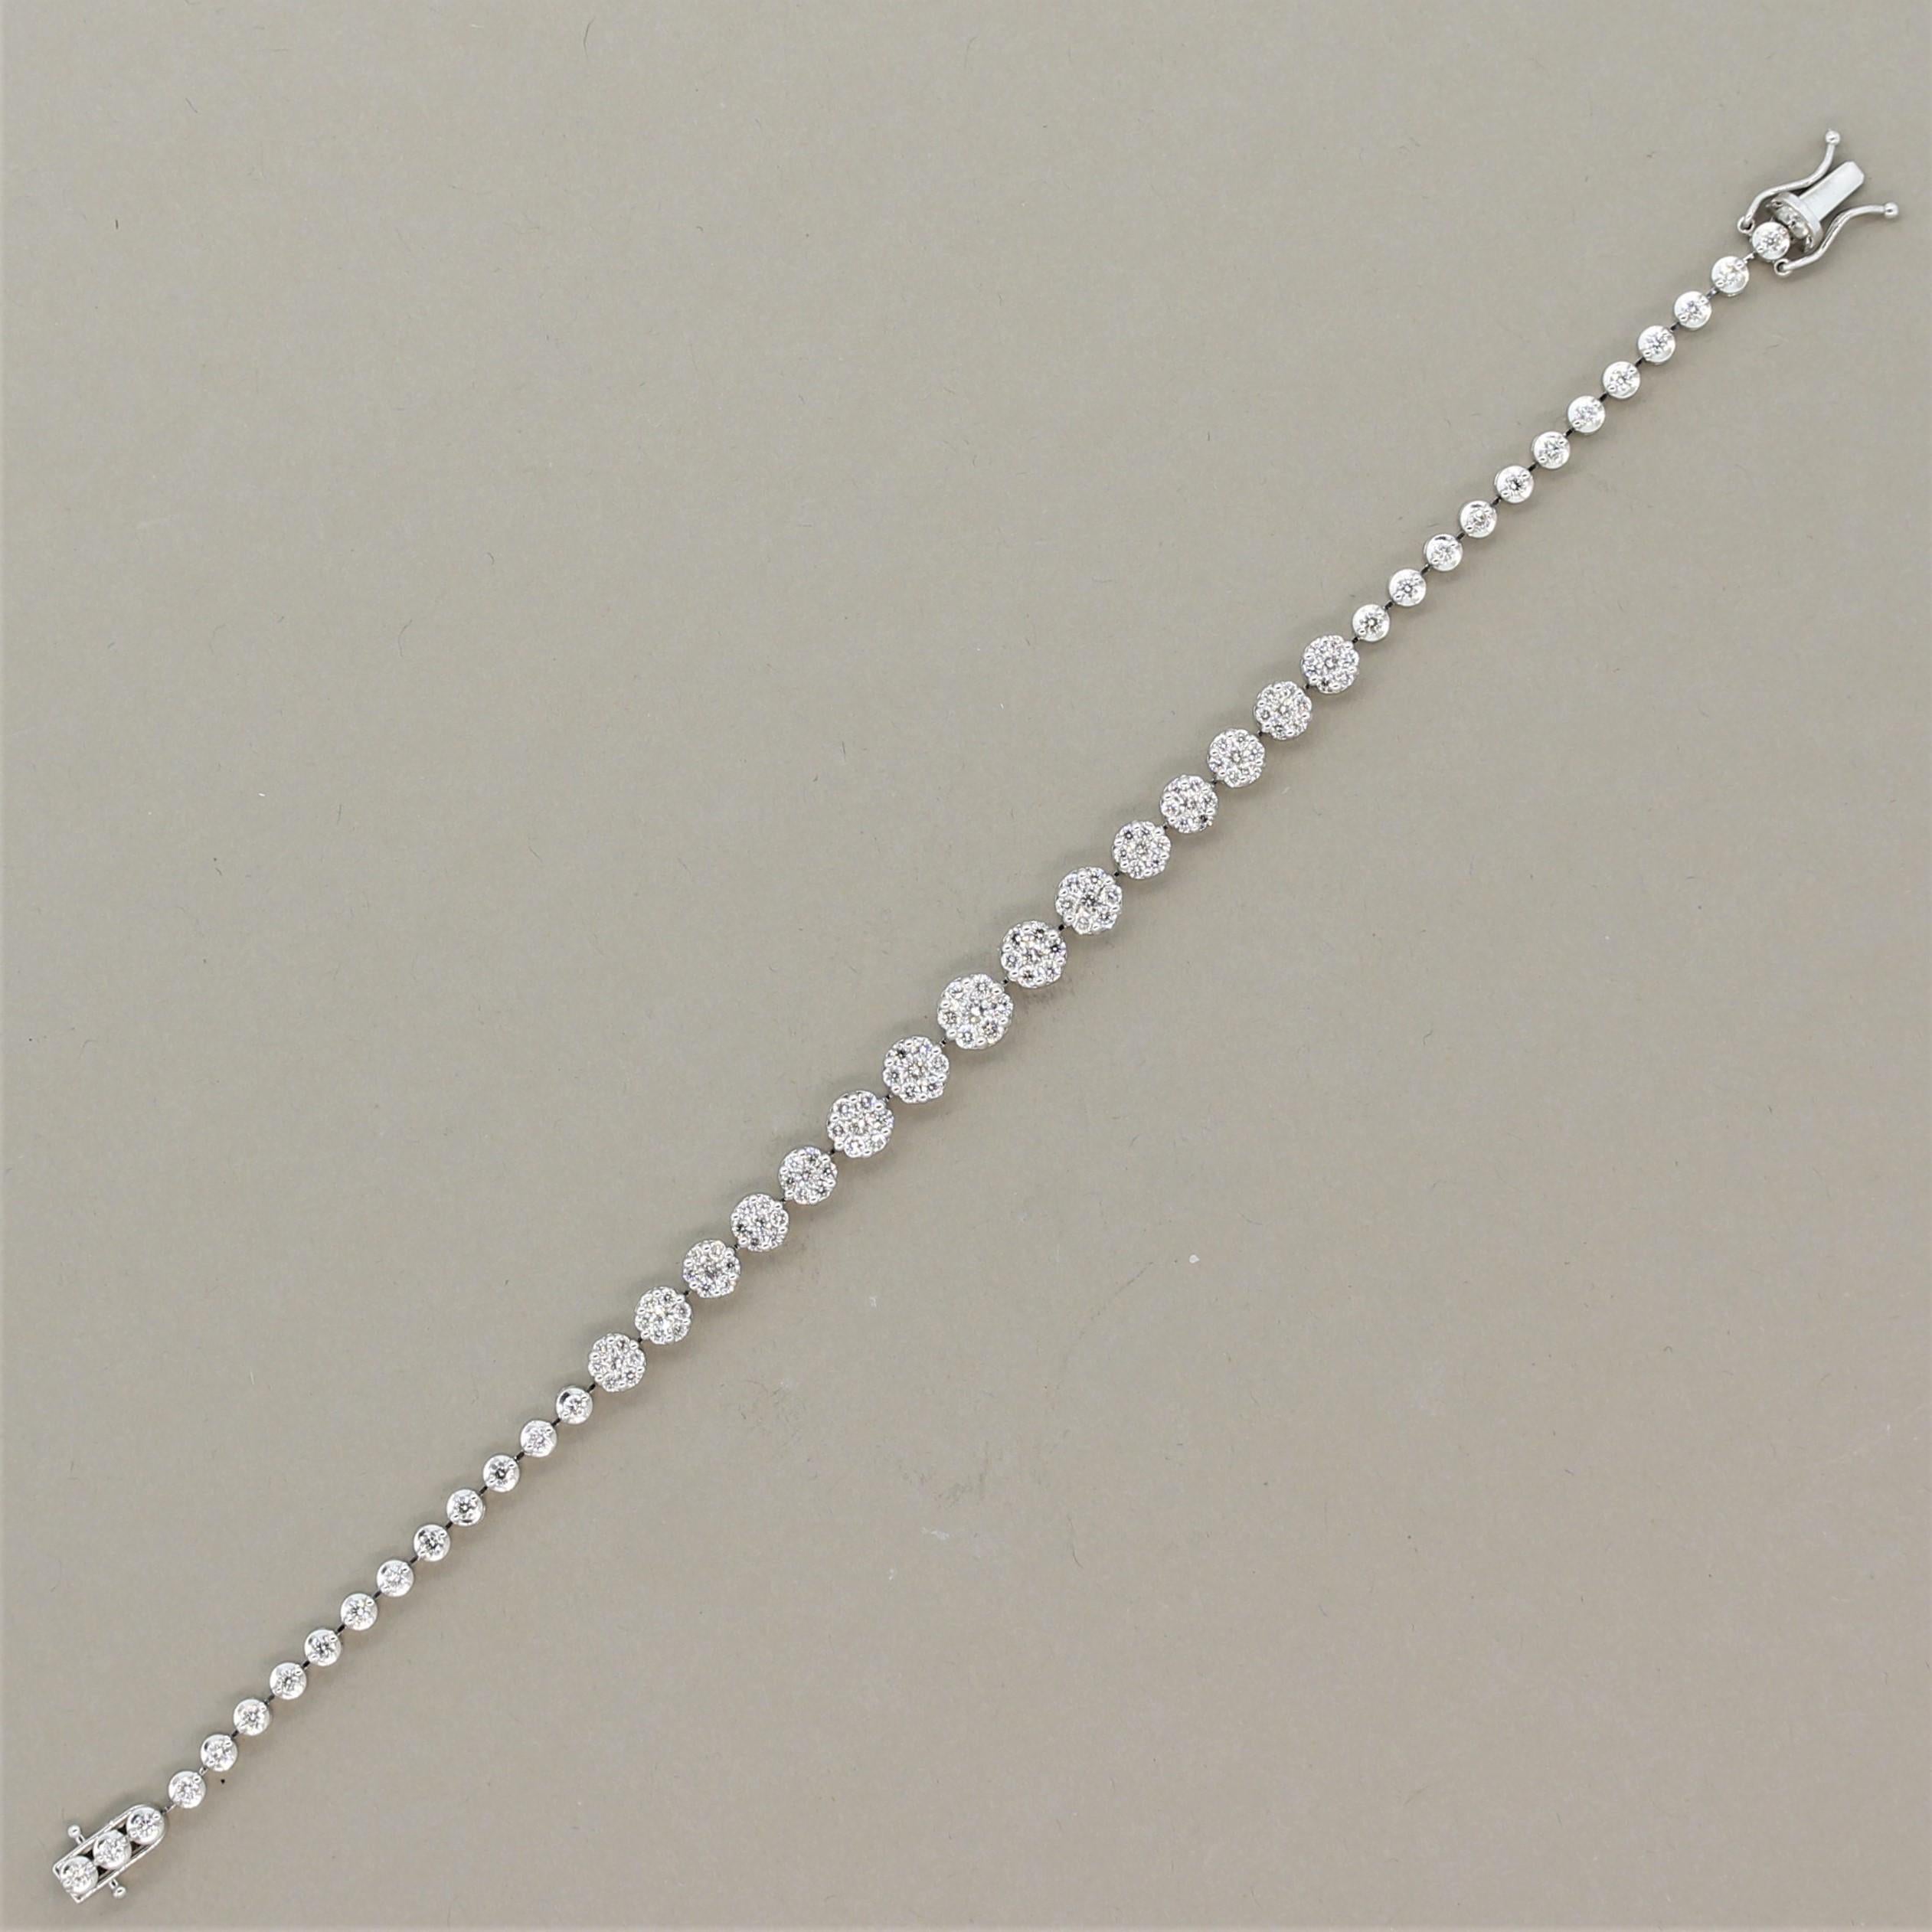 A simple yet chic bracelet made in 18k white gold. It features 2.57 carats of round brilliant cut diamonds with a potion of them set in a floral pattern in the center of the bracelet. Made in 18k white gold and excellently crafted.

Length: 7 inches